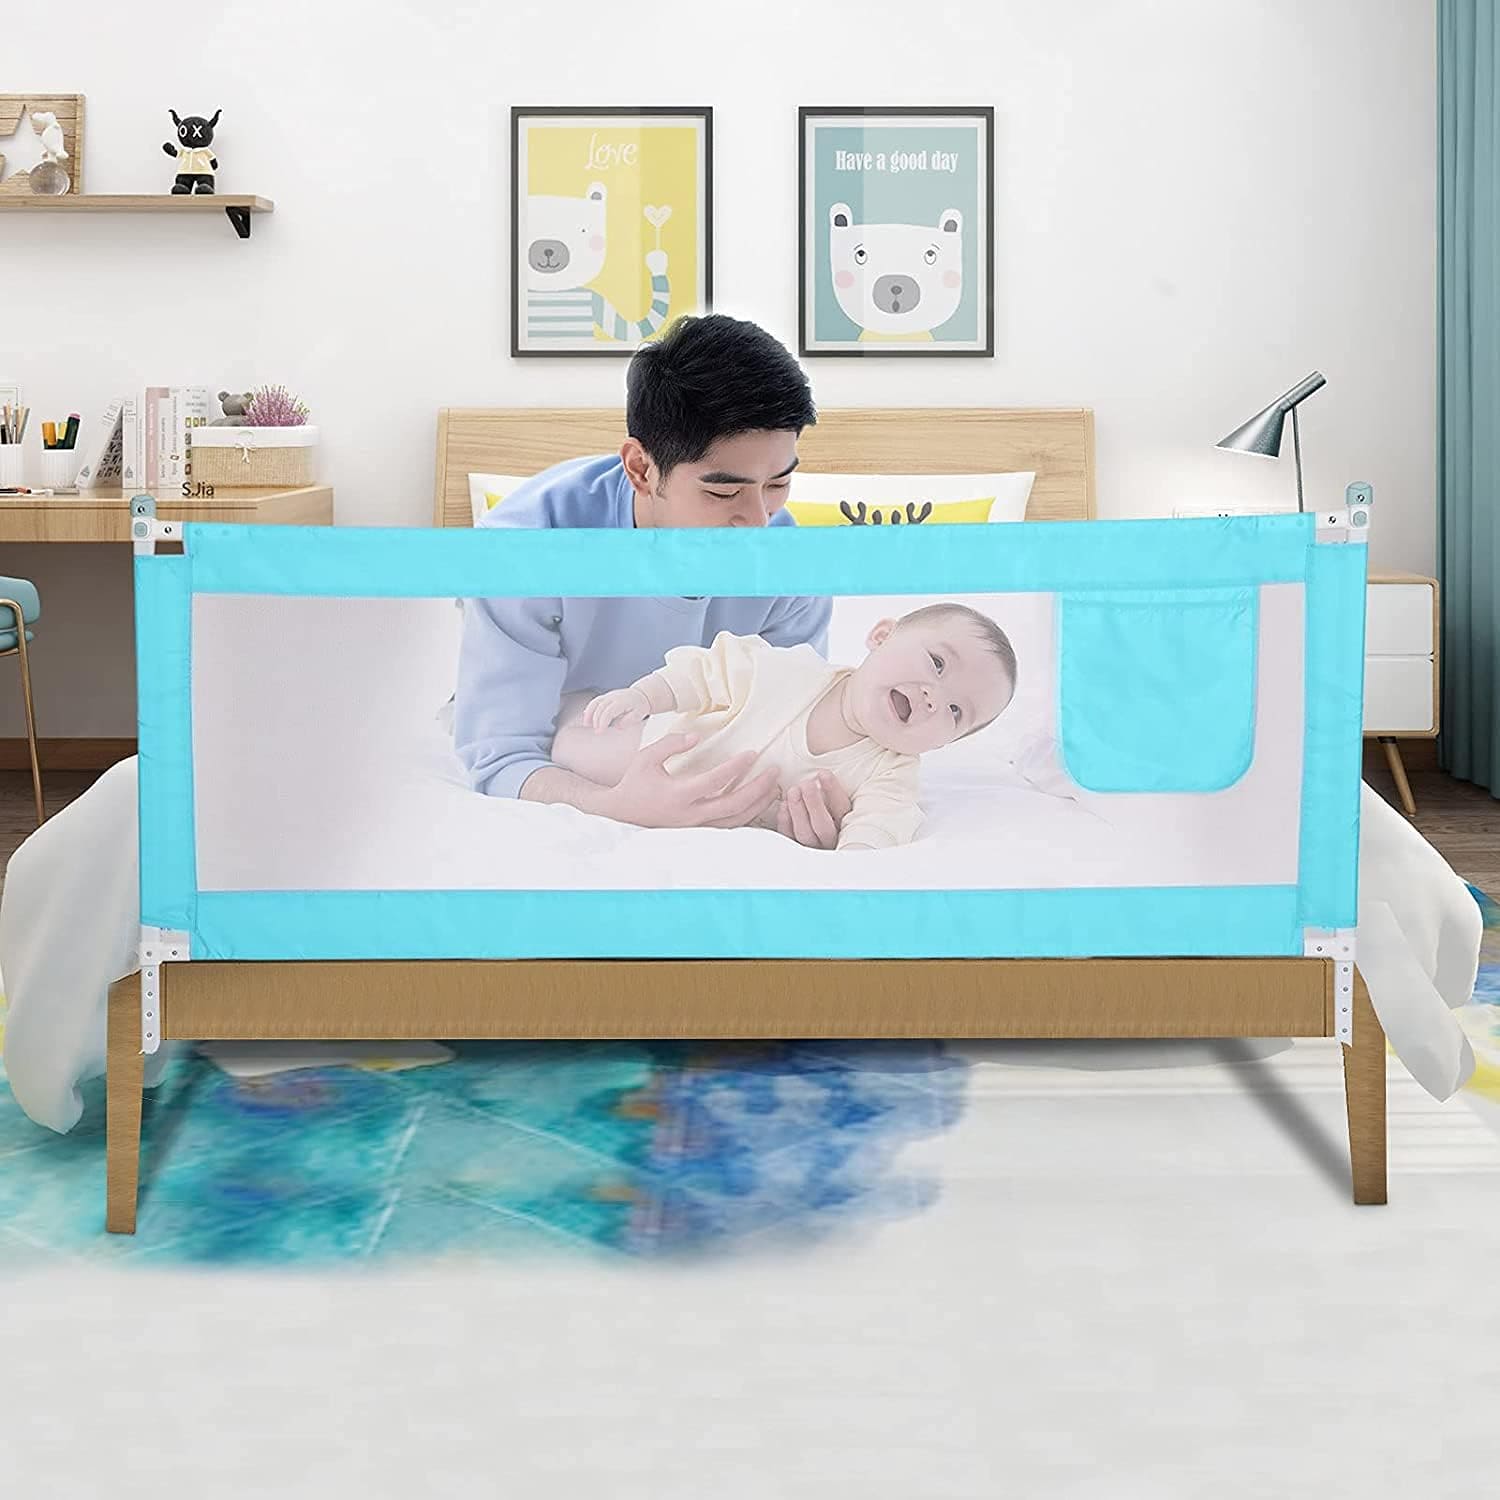 Children Bed Barrier, Baby Bed Safety Guard, Fence Guardrail Security, –  Yahan Sab Behtar Hai!